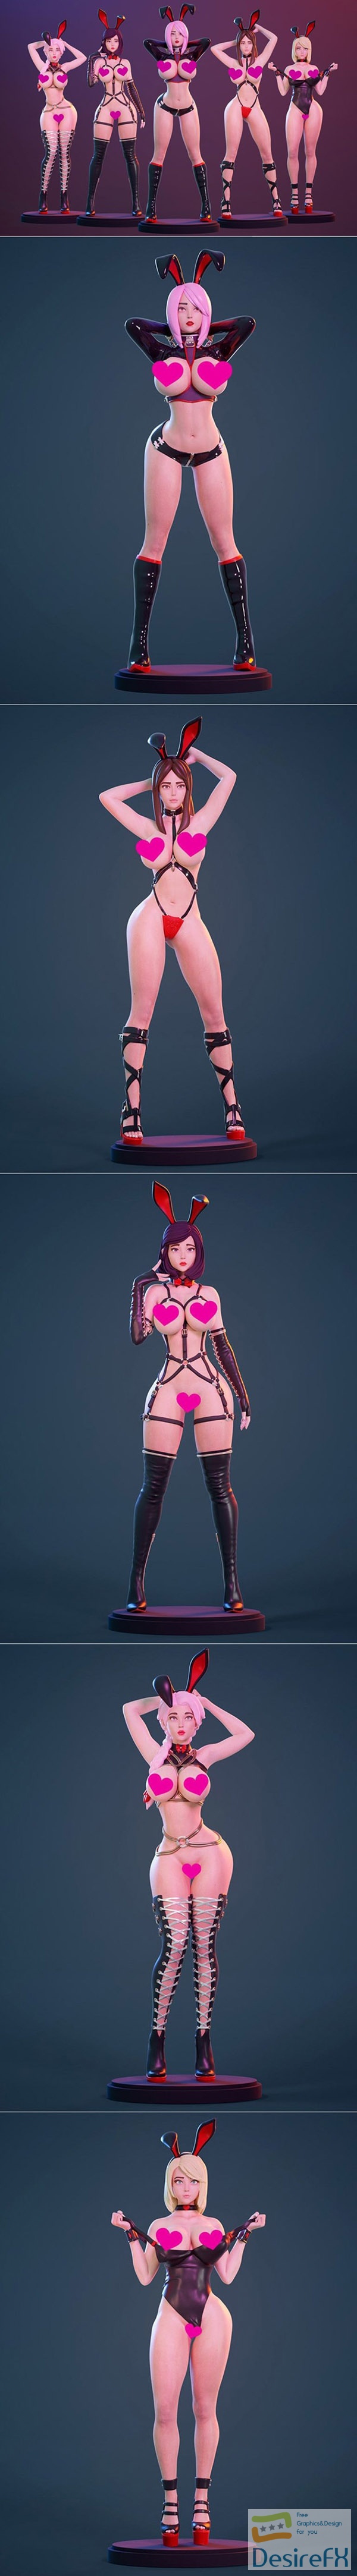 Figurine collection – Bunny girls – 5 pieces – 3D Print